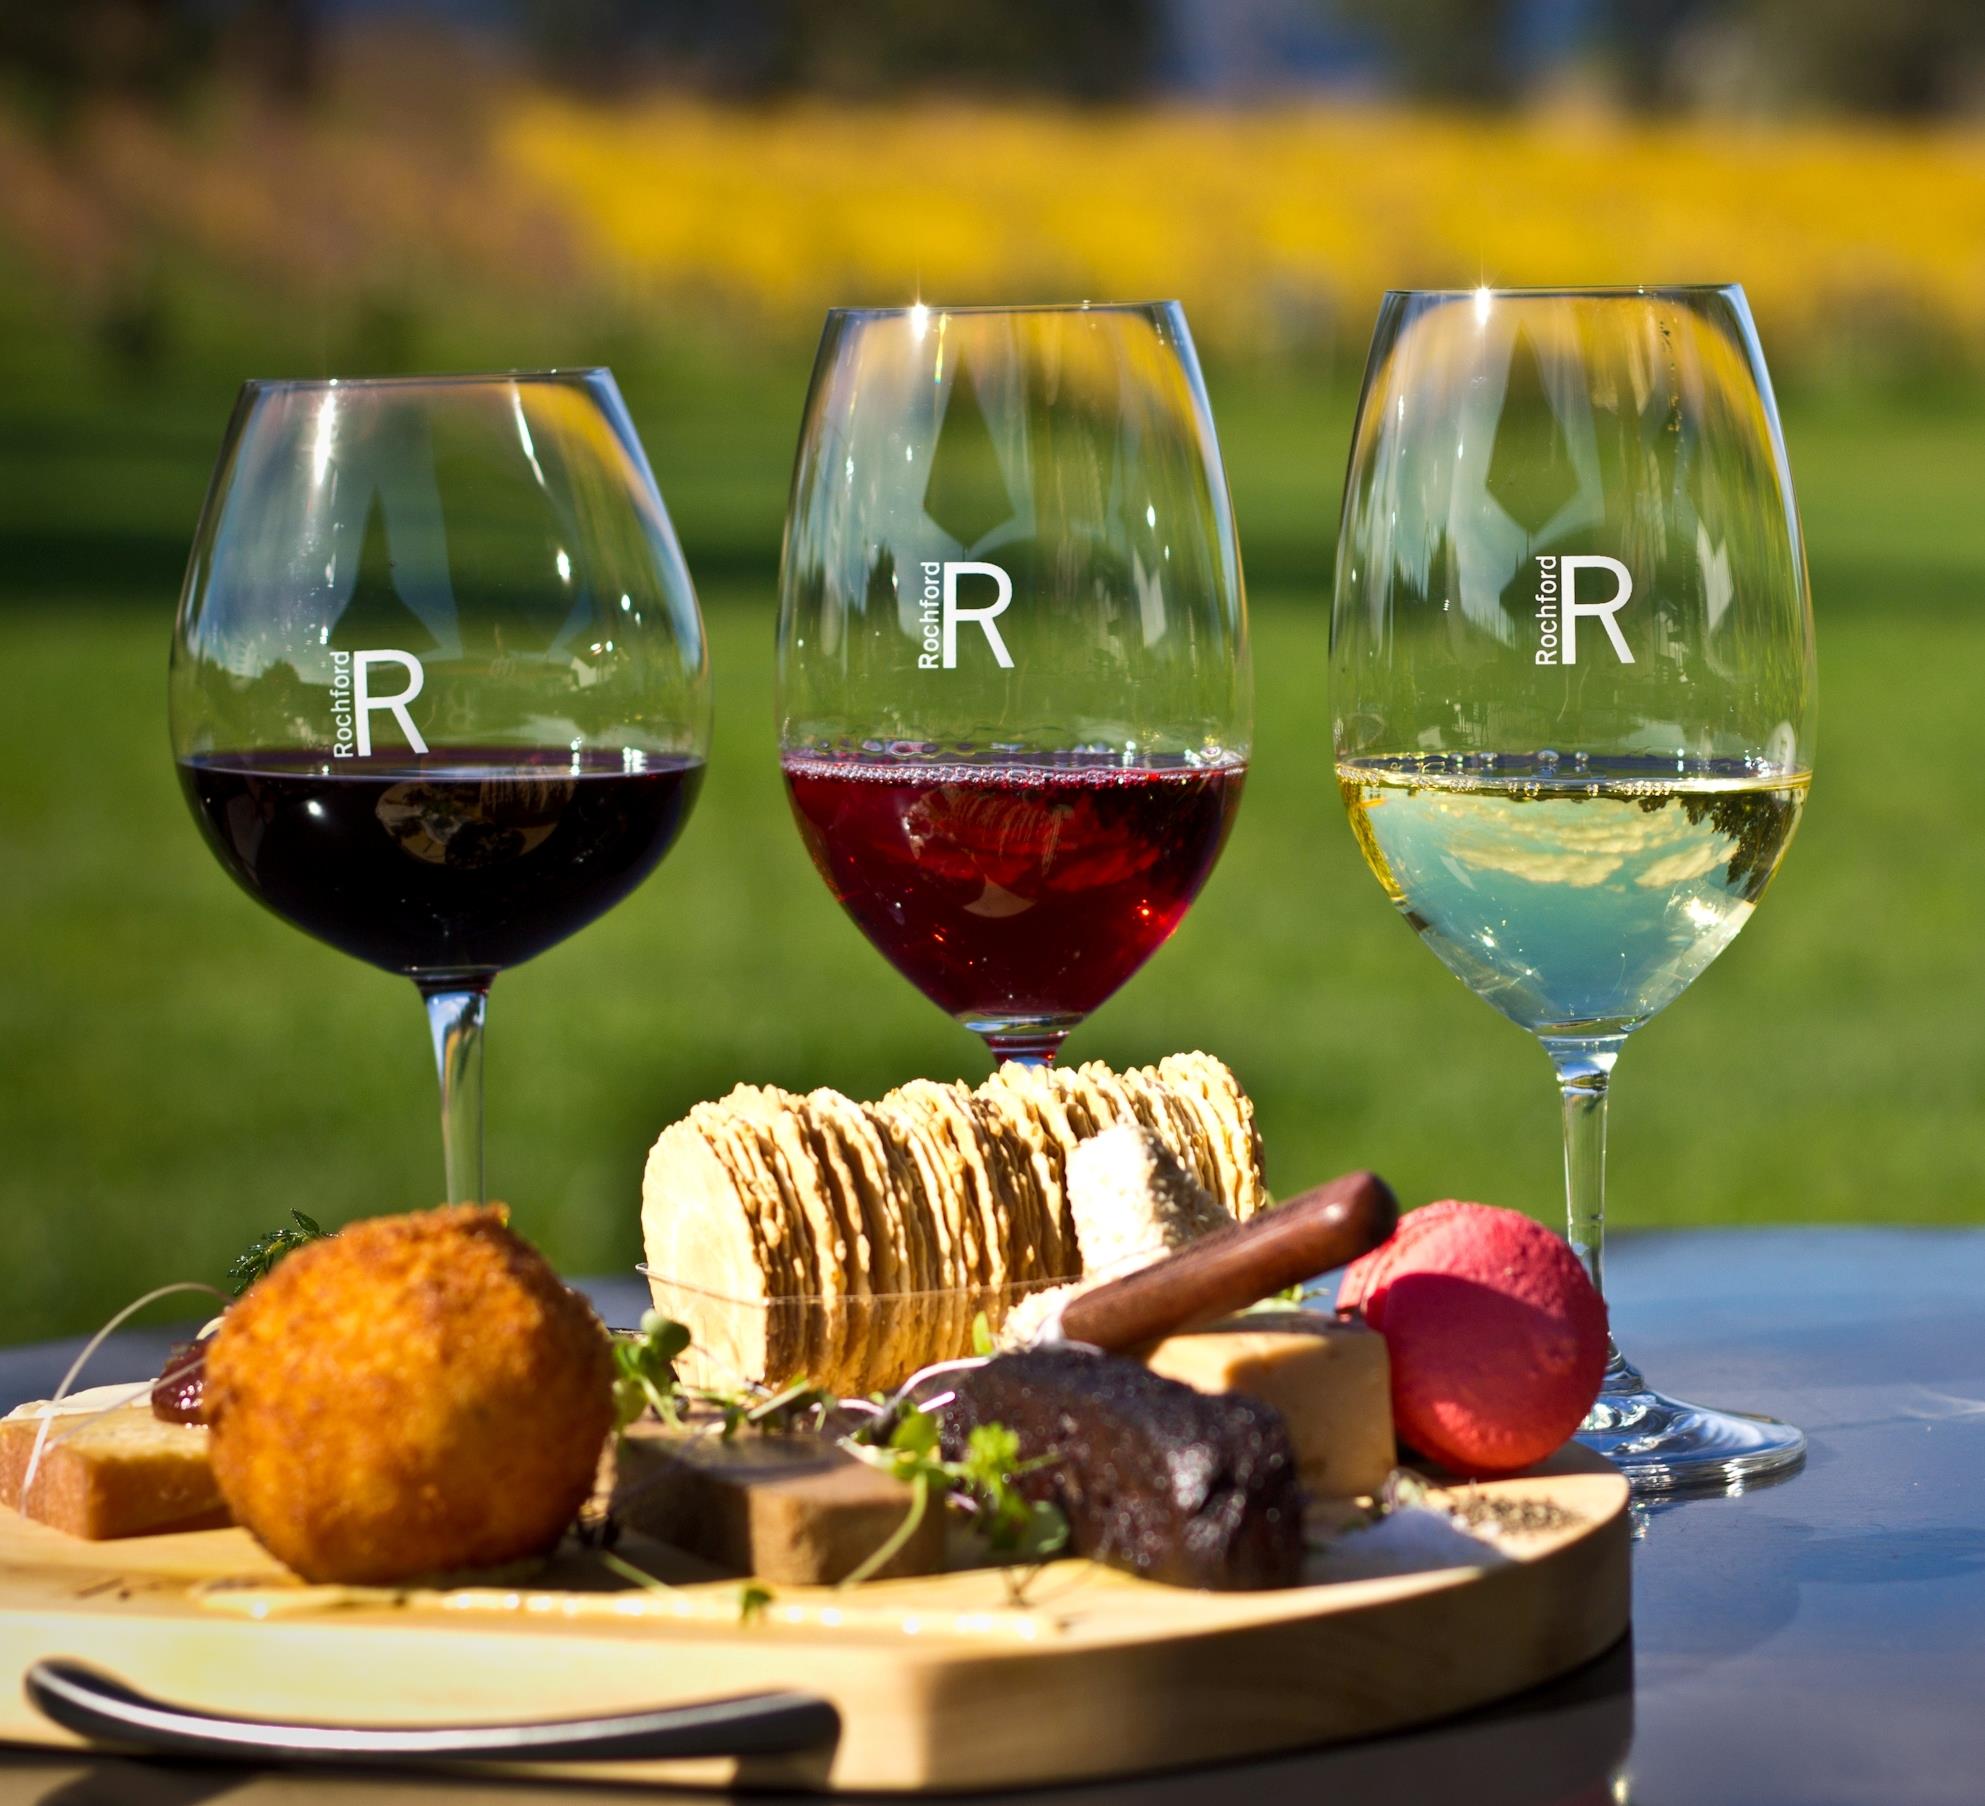 Yarra Valley Gourmet Tour from Melbourne